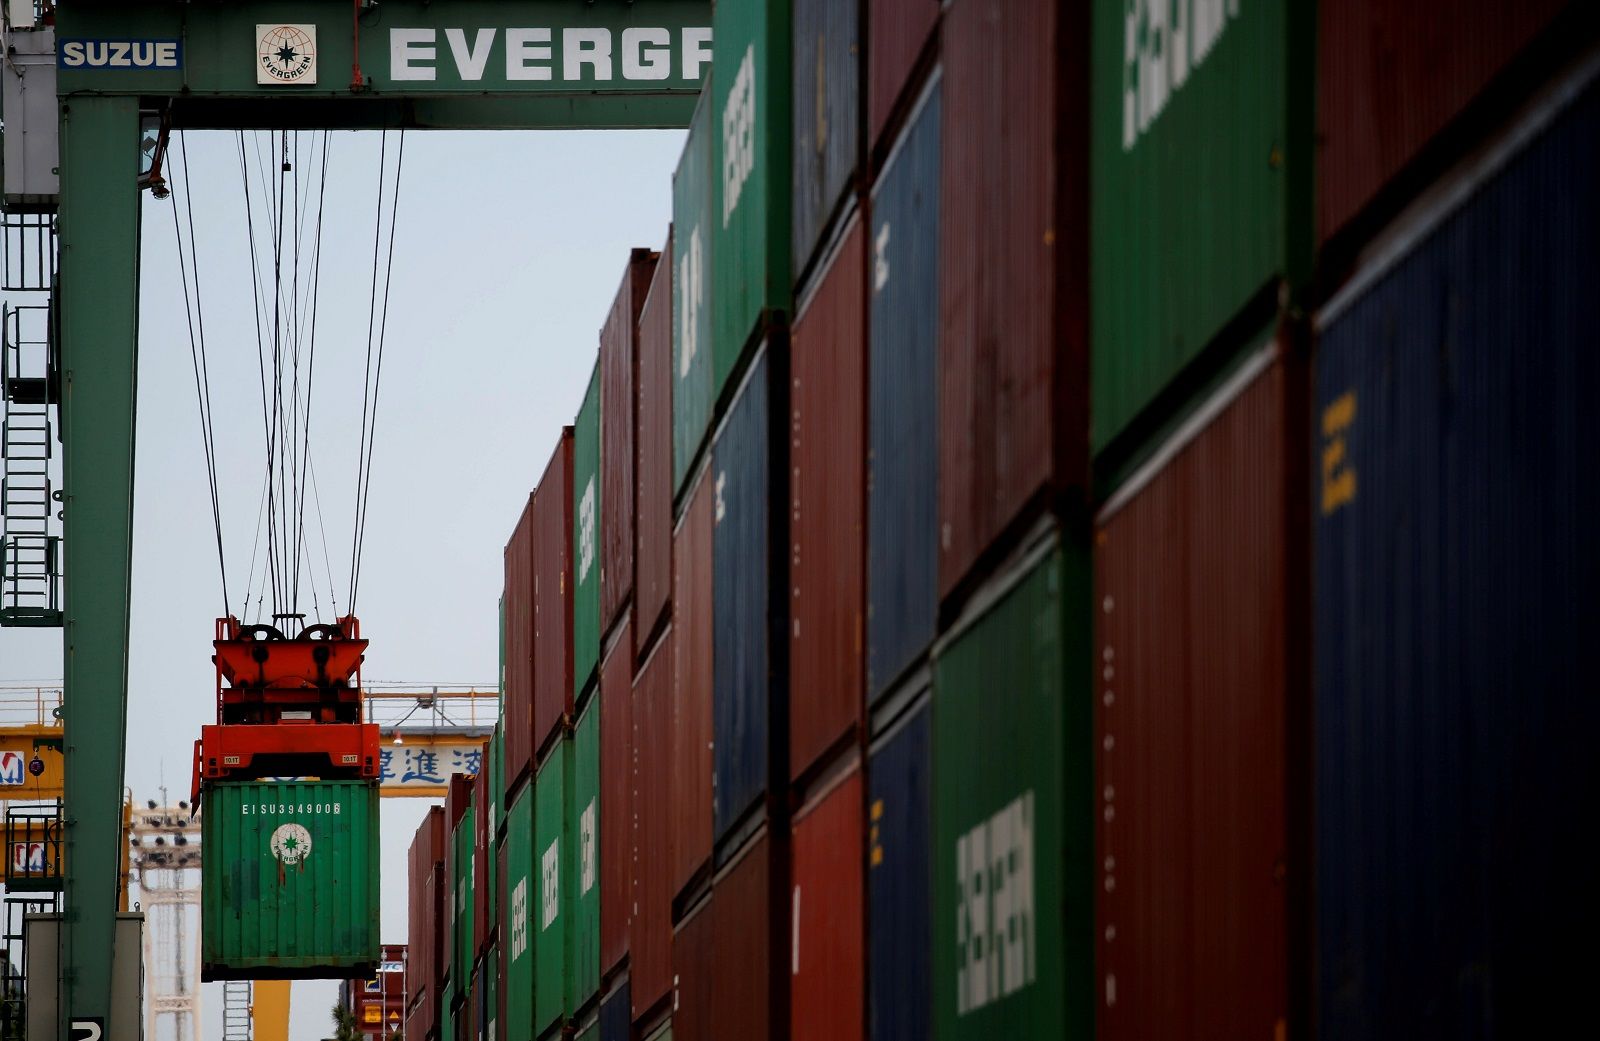  6. Exports grow 47% to $32.46 bn in June; trade deficit at $9.4 bn  | The country’s exports rose by 47.34 percent to $32.46 billion in June on account of healthy growth in sectors such as engineering, gems and jewellery and petroleum products, even as trade deficit aggregated at $9.4 billion during the month, according to the data released by the commerce ministry on Friday. Imports in June 2021 grew by 96.33 percent to $41.86 billion, from $21.32 billion in June last year.